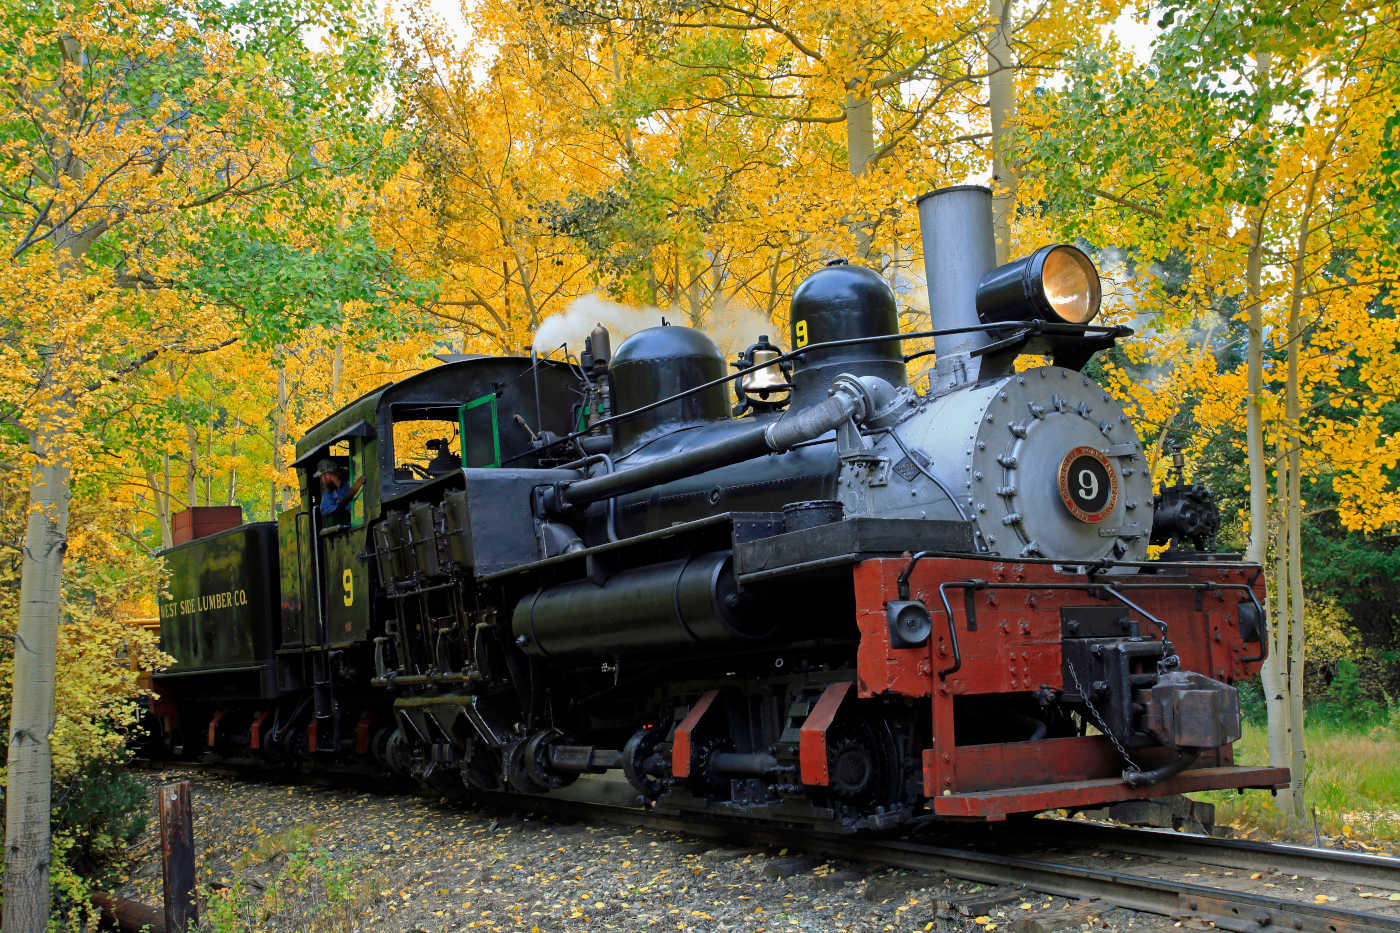 train in fall colors